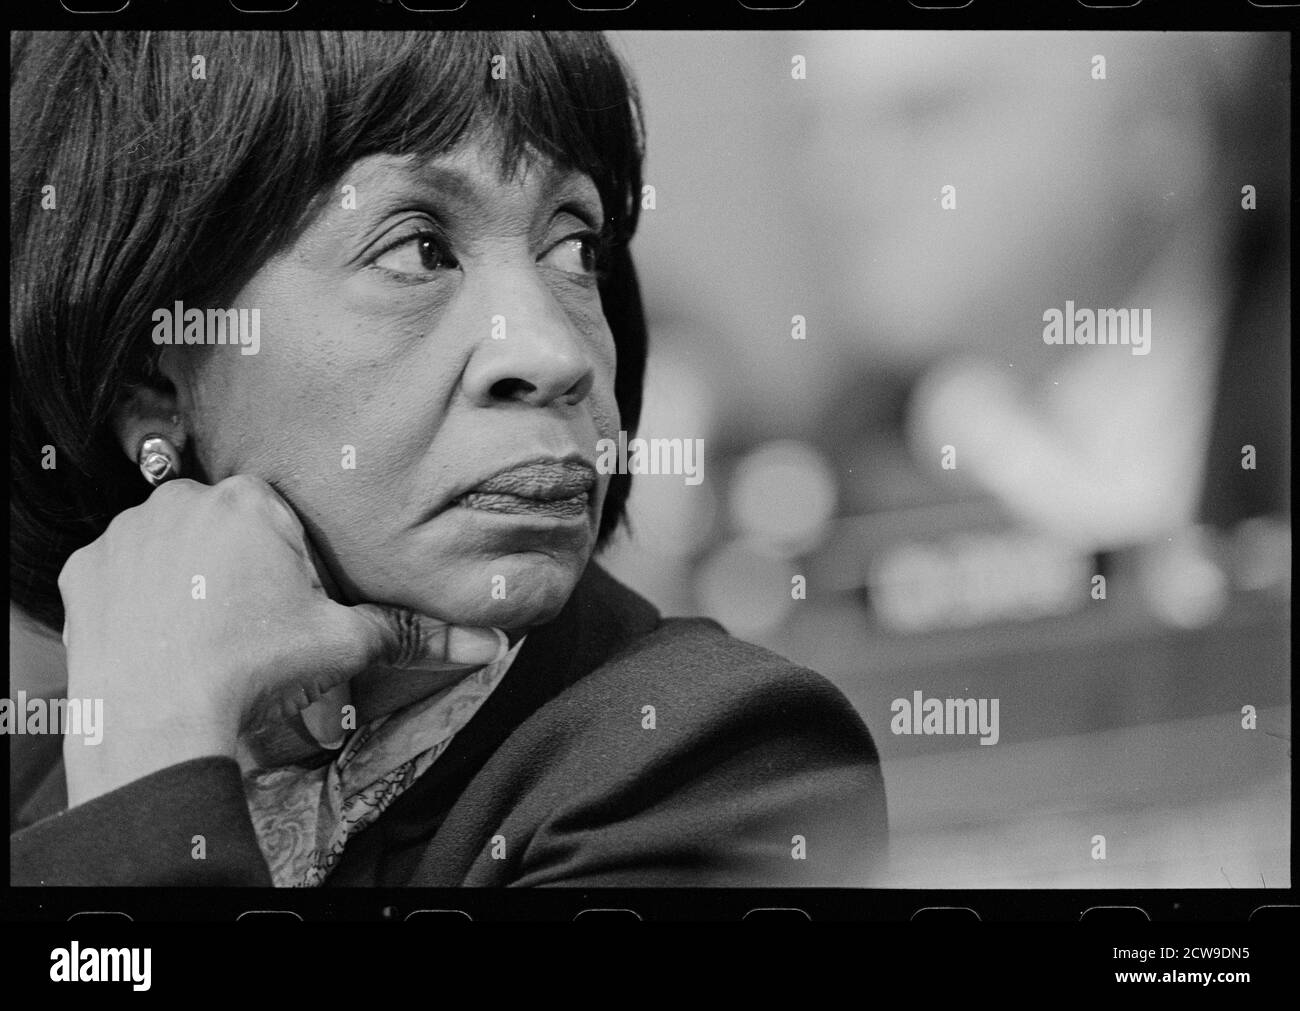 Representative Maxine Waters (D-CA) (b.1938), head-and-shoulders portrait, during a Judiciary Committee hearing related to the impeachment of President Bill Clinton, Washington, DC, 12/1998. (Photo by Rebecca Roth/CQ Roll Call Collection/RBM Vintage Images) Stock Photo